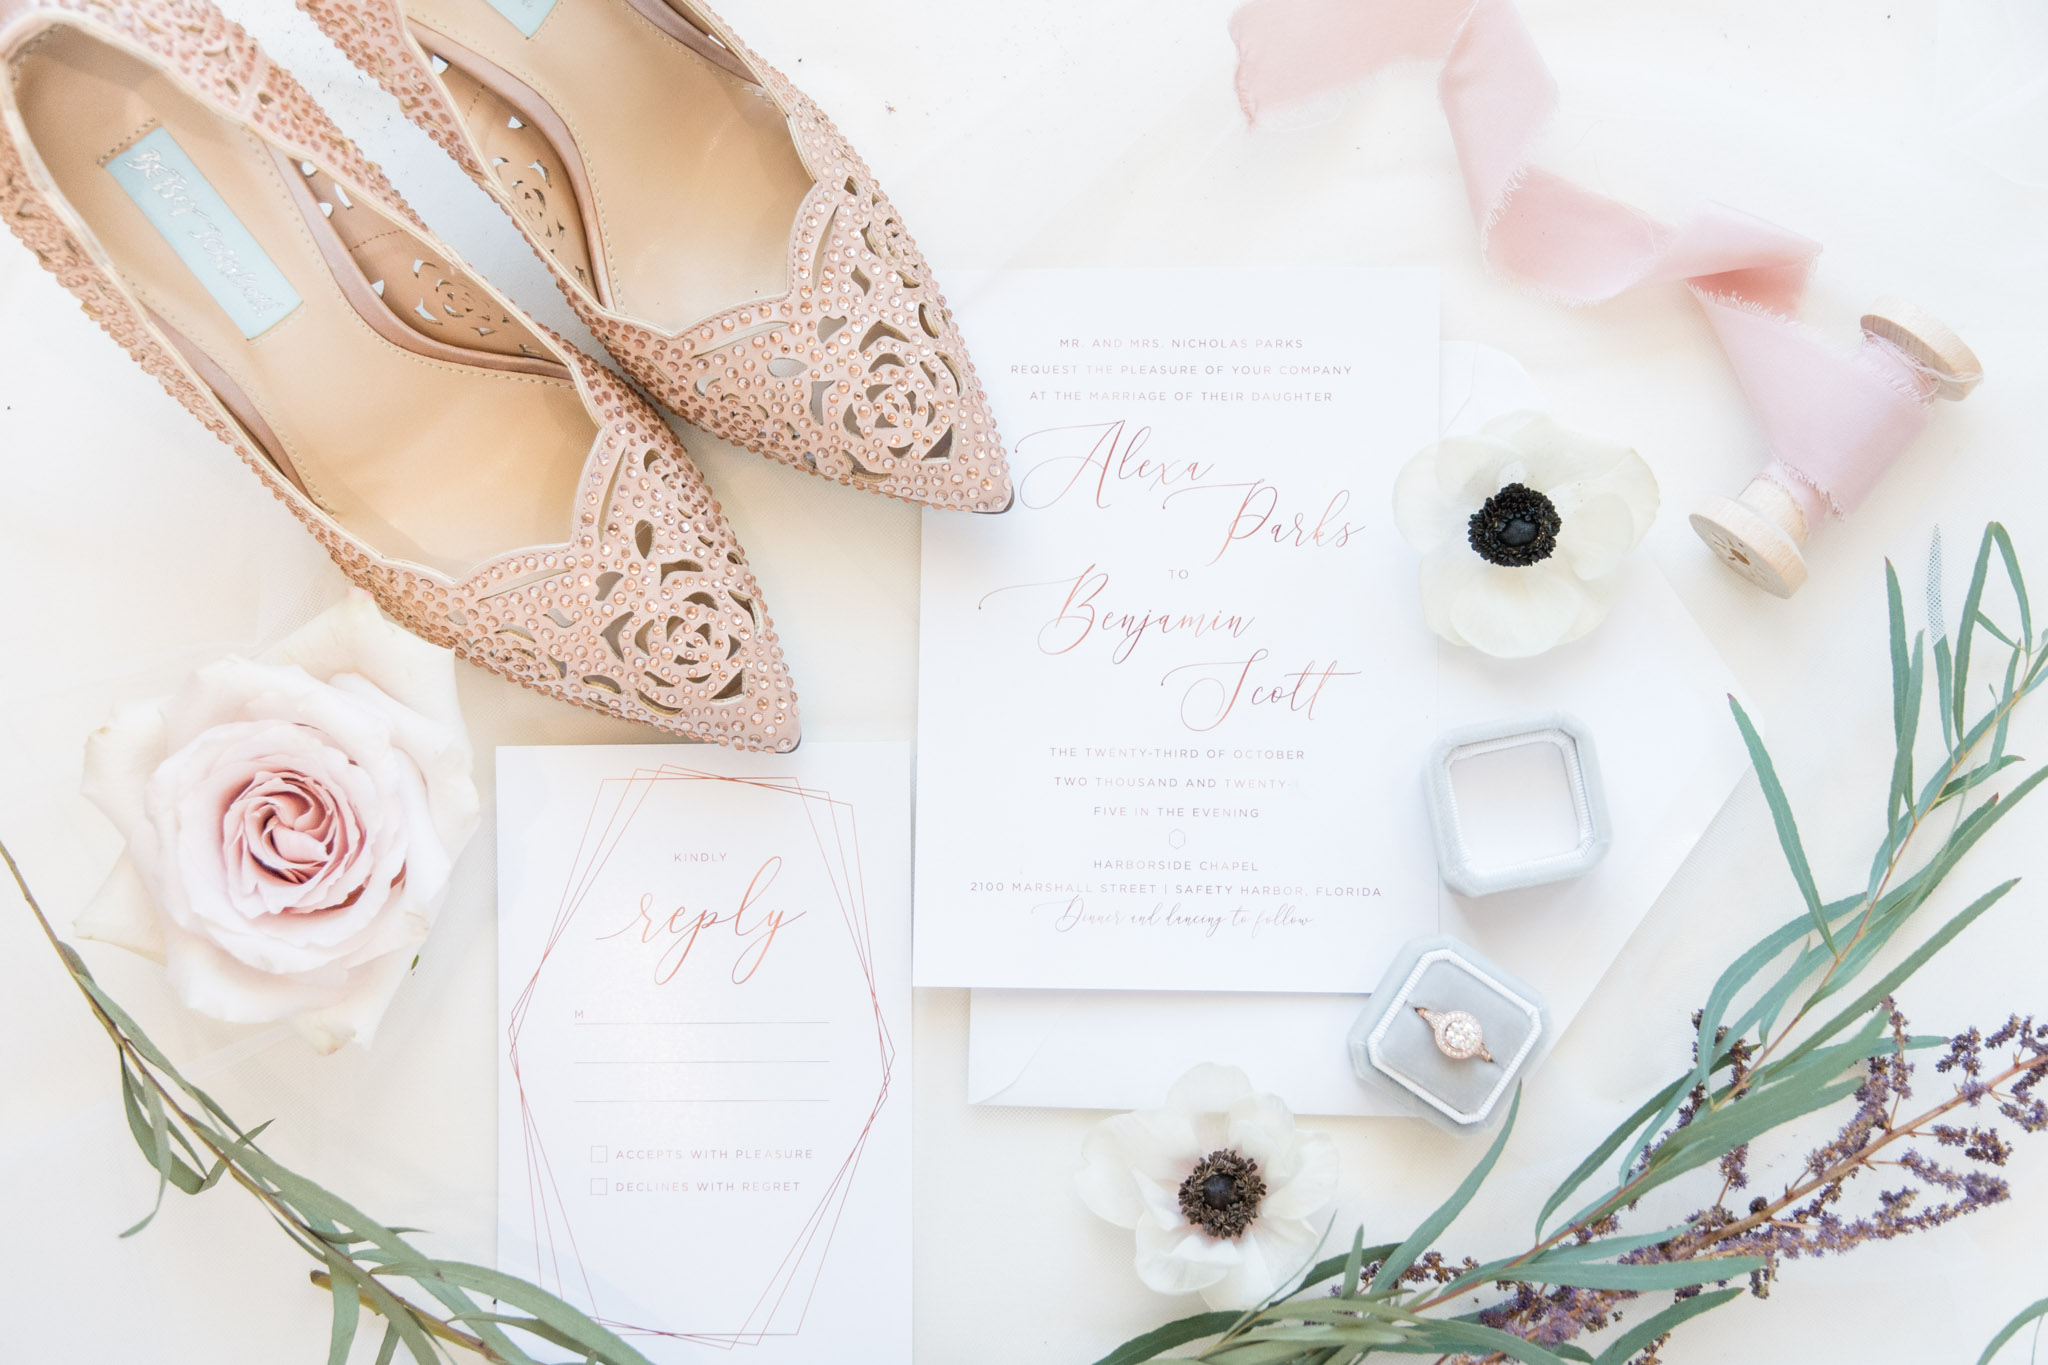 Bride's wedding invitations and details.